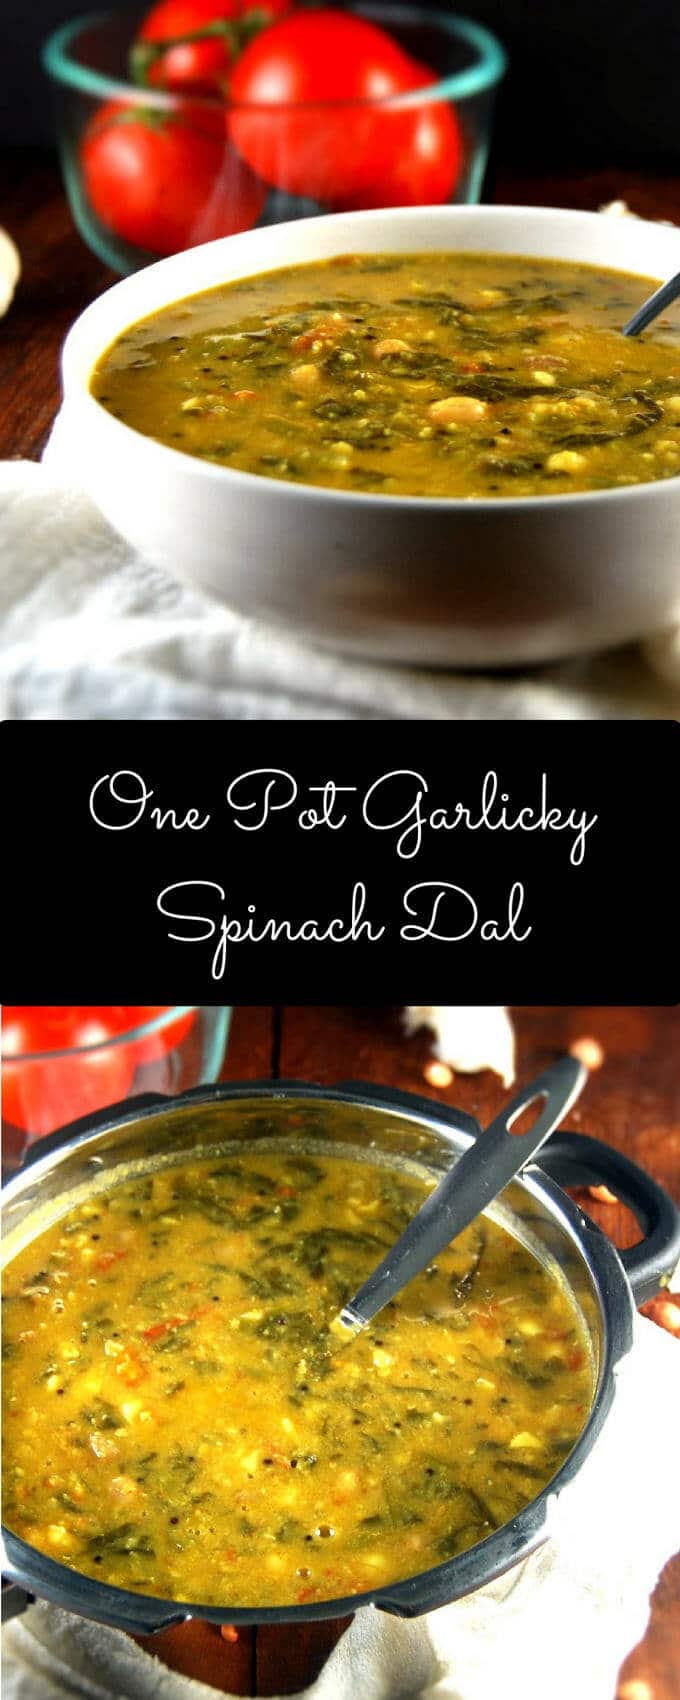 Garlicky Spinach Dal images with text that says "one pot garlicky spinach dal"